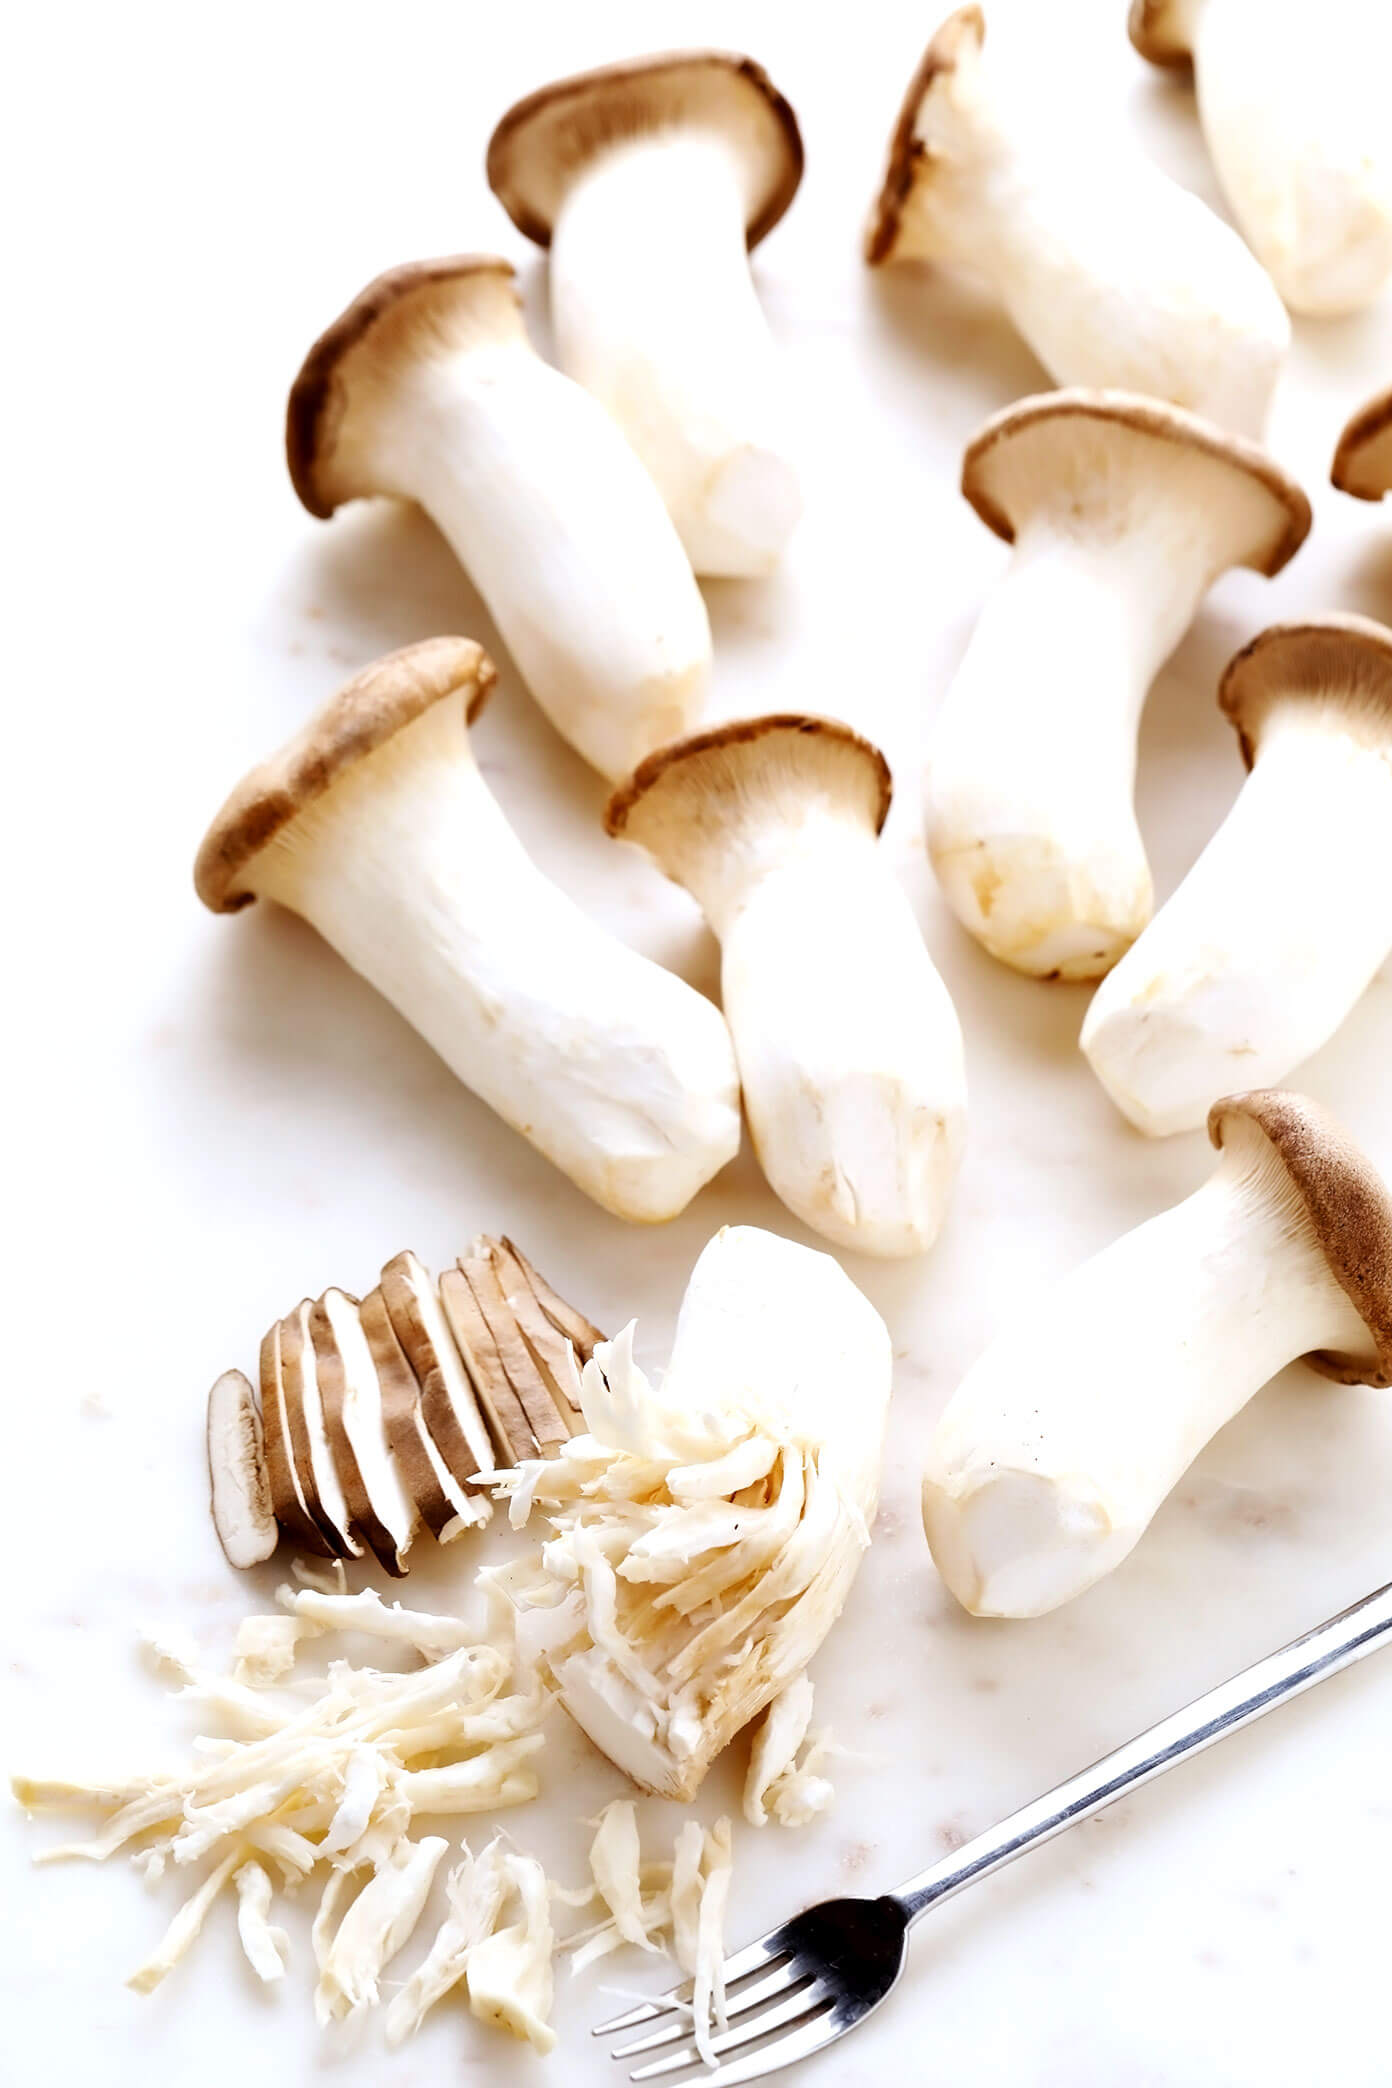 How To Shred King Oyster Mushrooms With A Fork